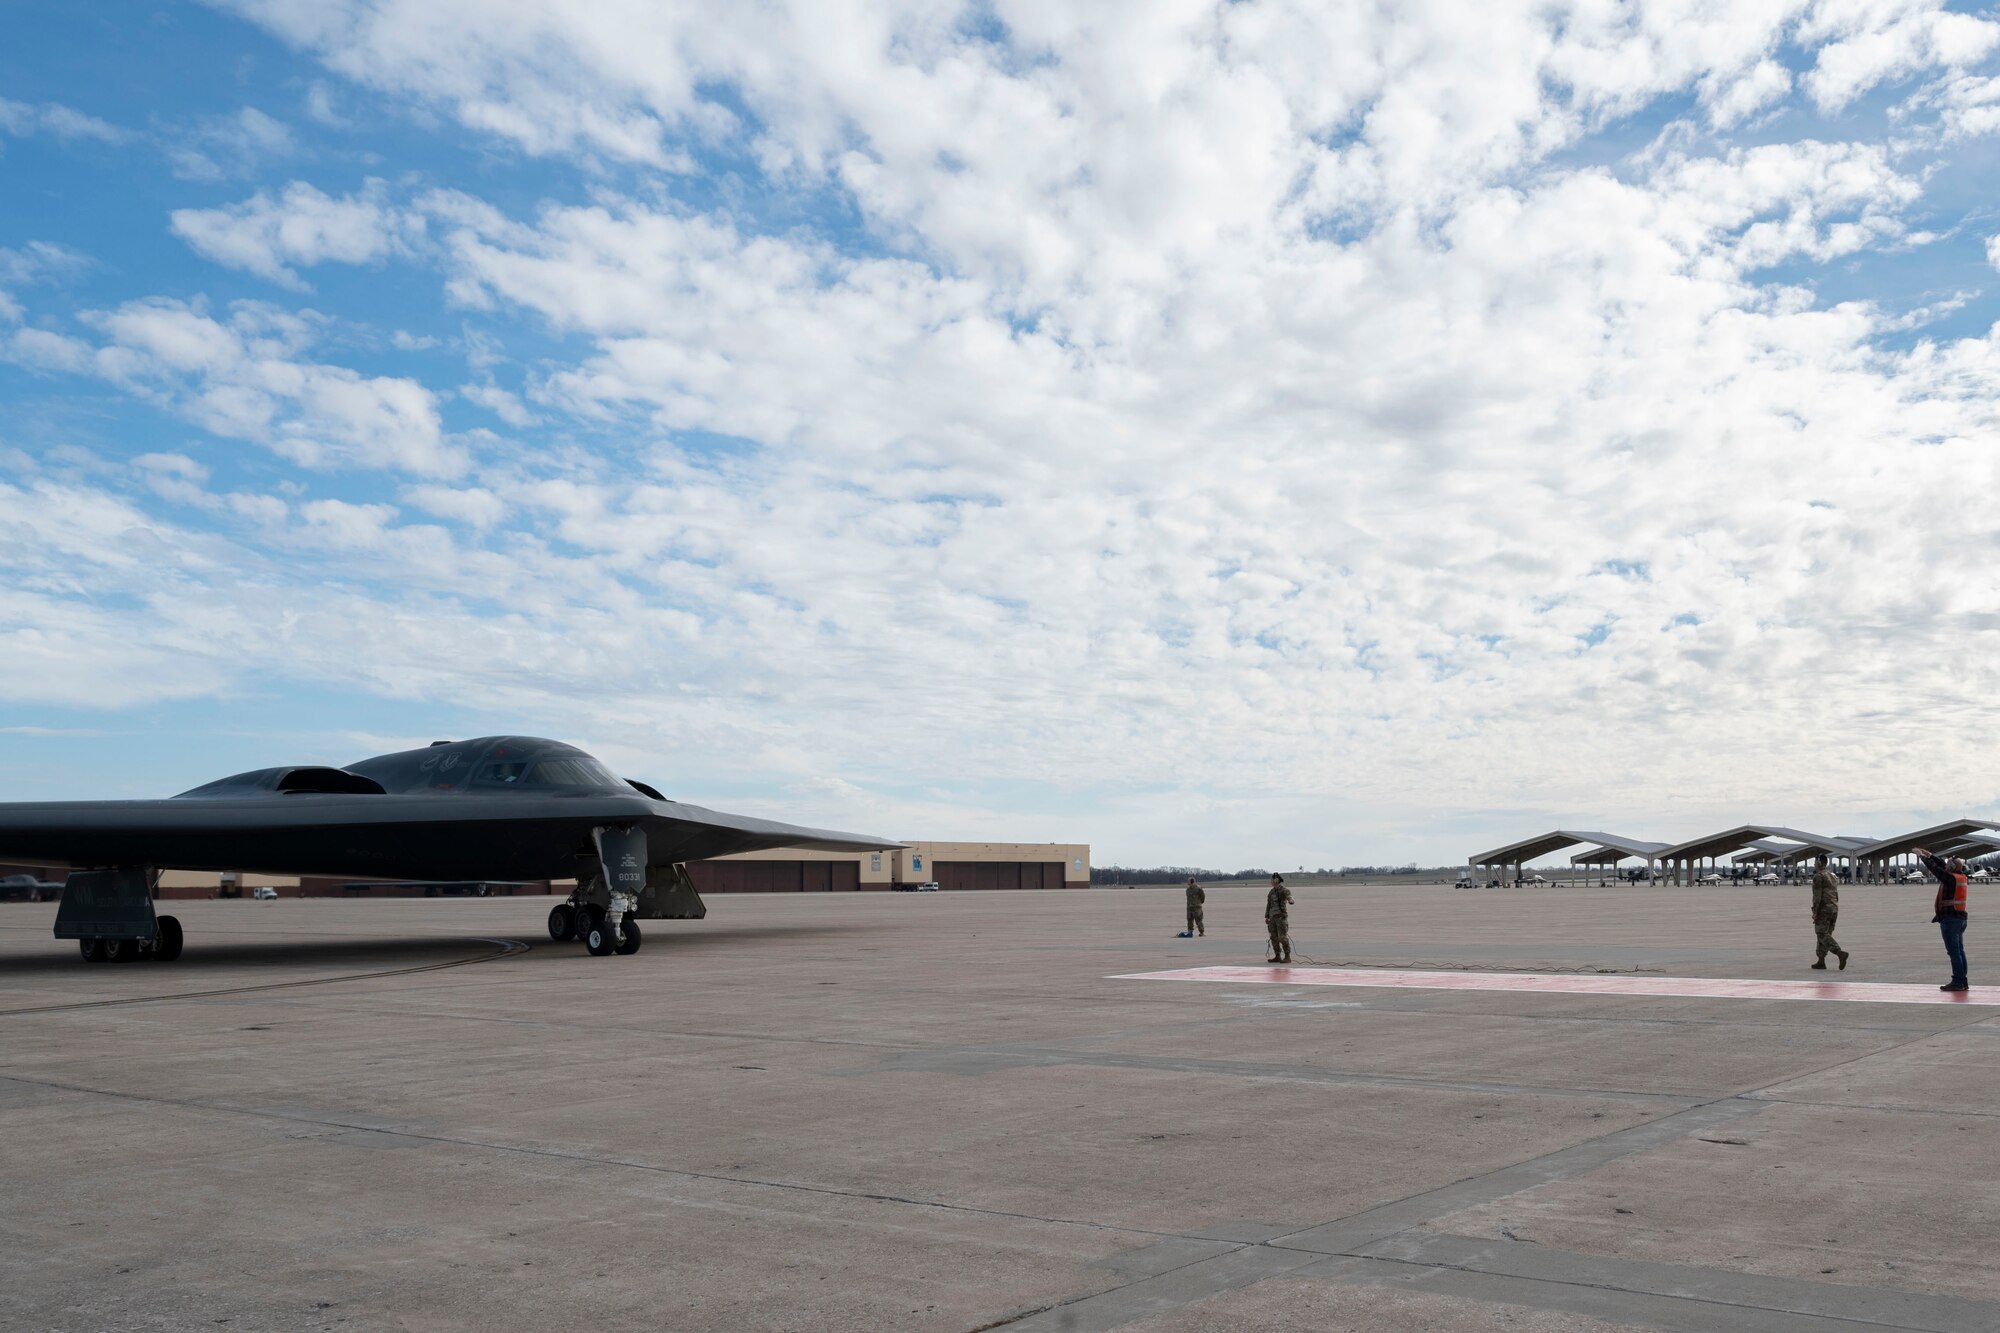 Members of the 509th Bomb Wing conduct post-flight operations for a B-2 Spirit stealth bomber during a ceremony at Whiteman Air Force Base, Mo., Dec. 15, 2023. The ceremony reenacted the delivery of the installation’s first B-2, Spirit of Missouri on Dec. 17, 1993. (U.S. Air Force photo by Tech. Sgt. Anthony Hetlage)